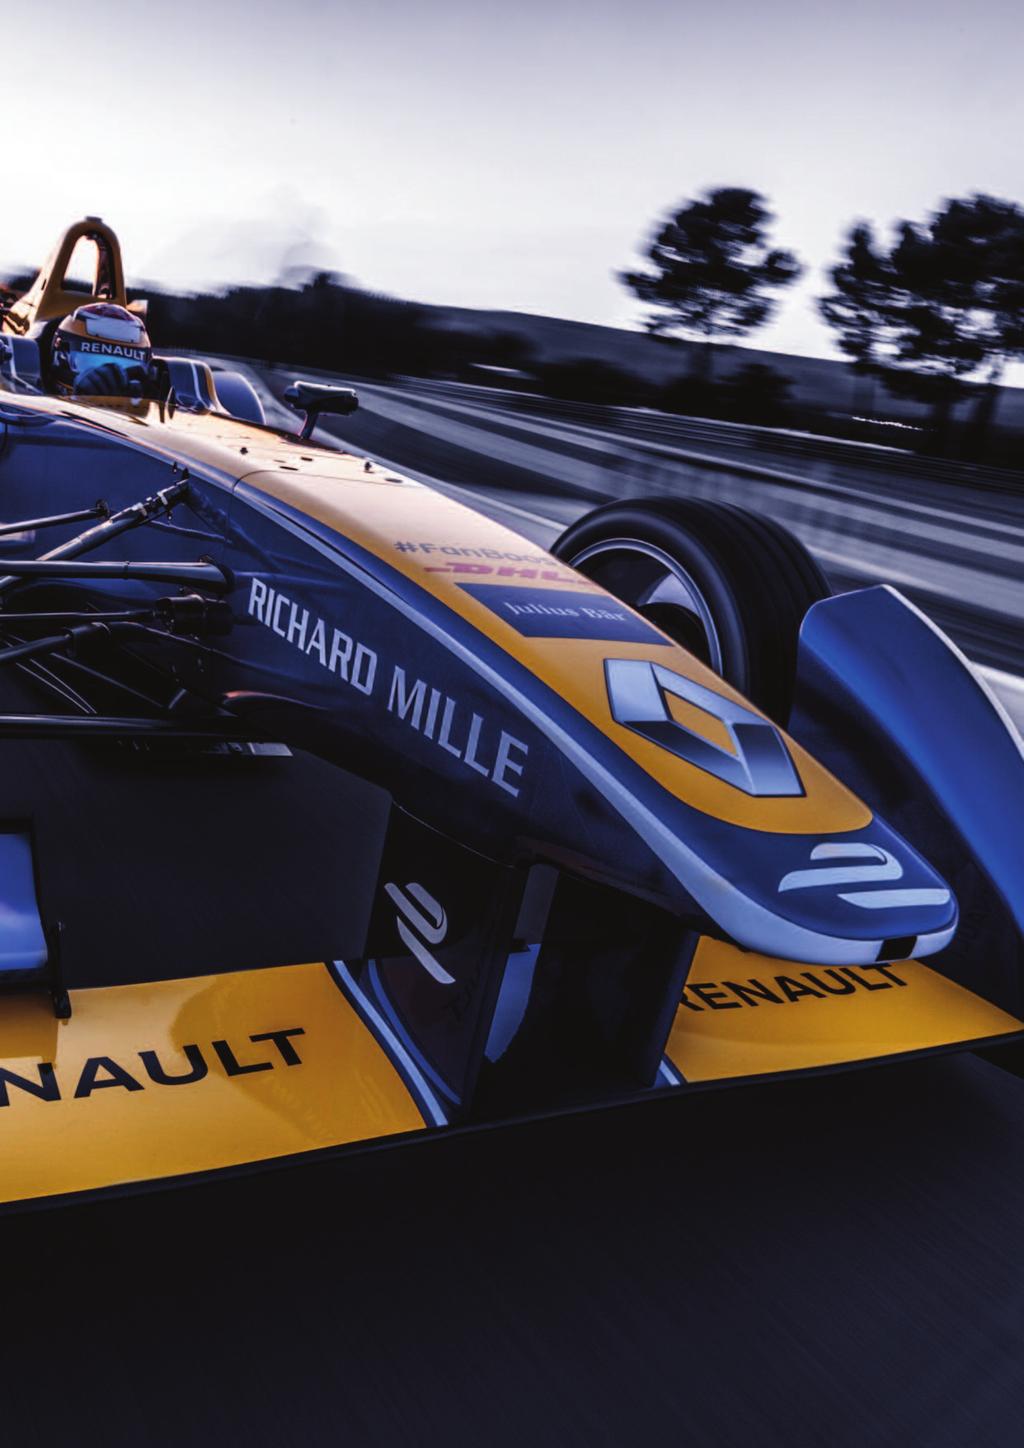 THE TEAM SENIOR MANAGEMENT Ahead of the inaugural Formula E season two of the biggest names in French motorsport, four-time Formula World Champion and Renault ambassador Alain Prost and